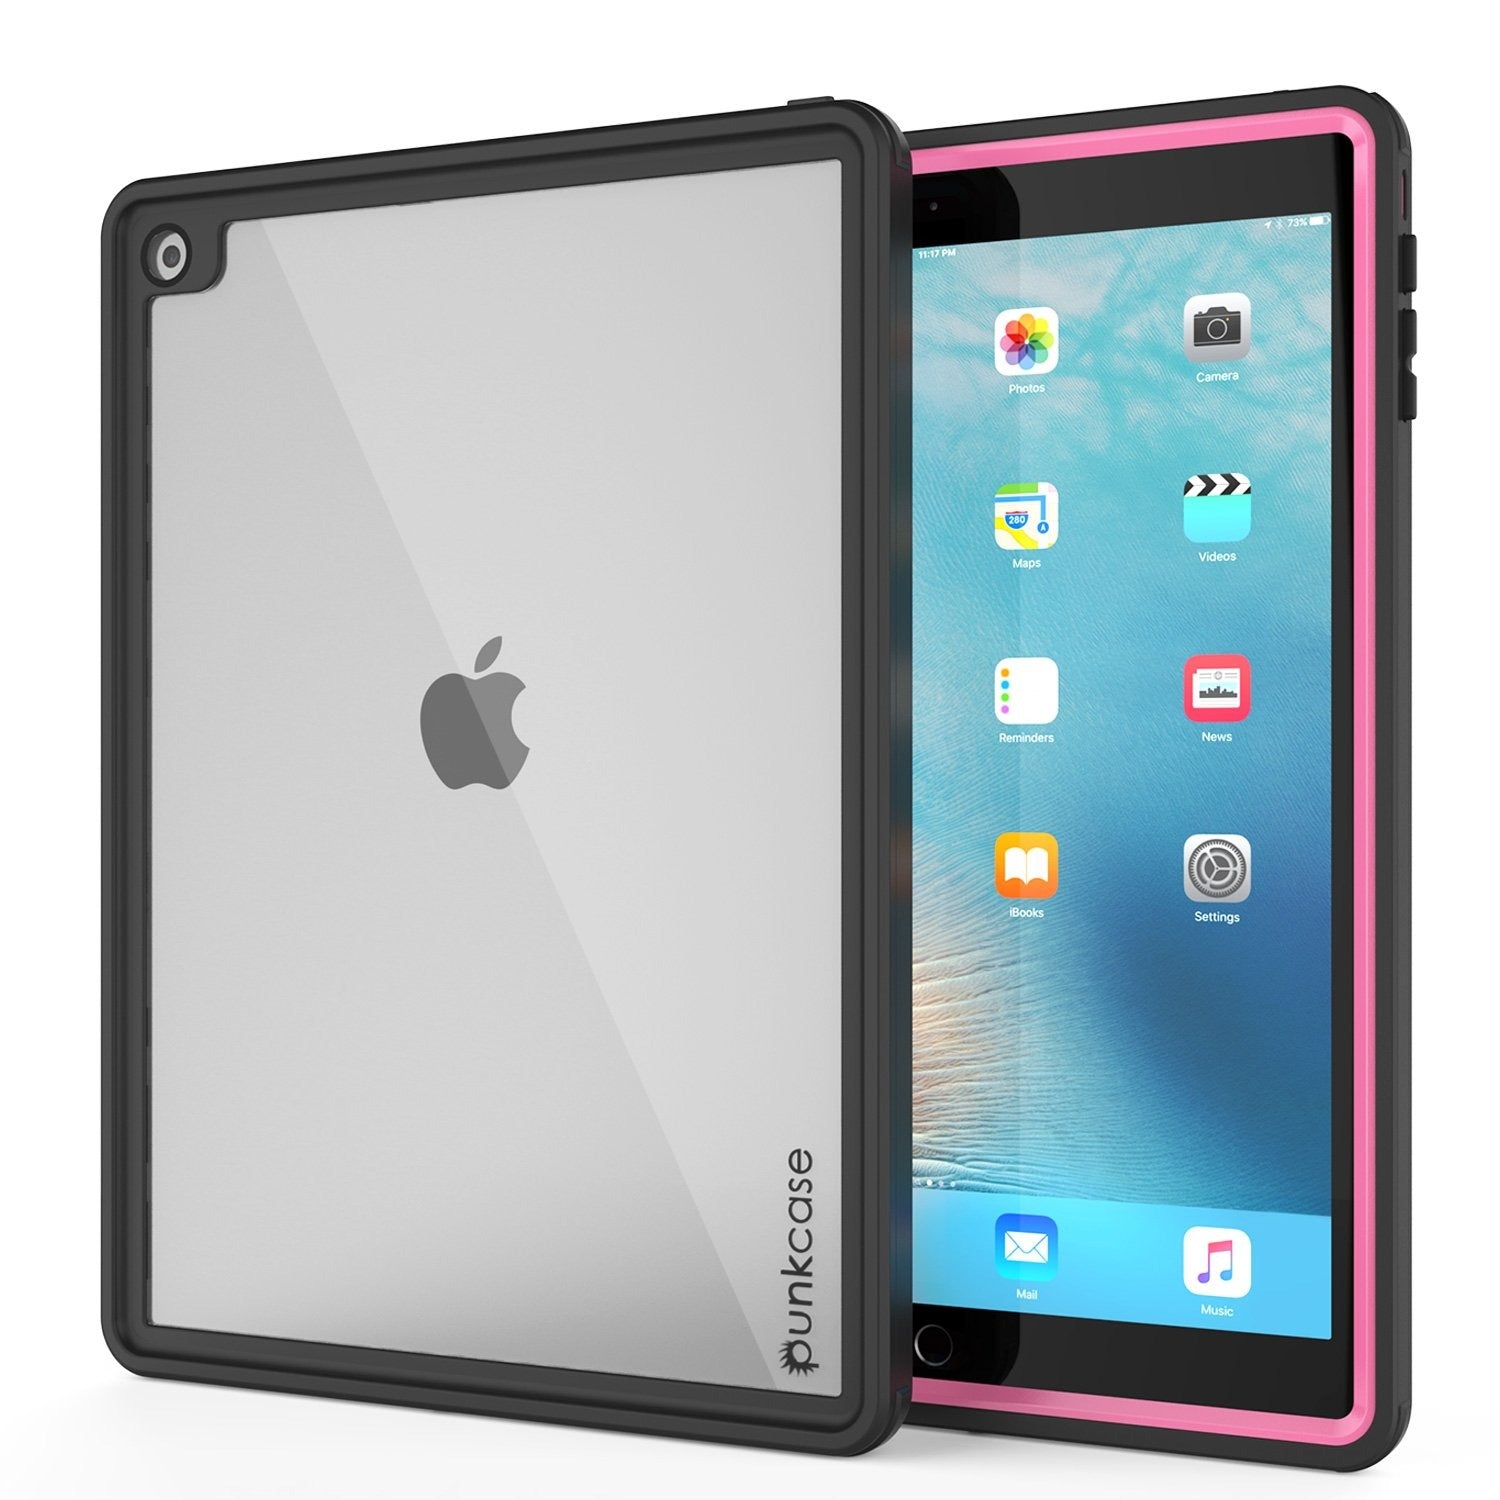 Punkcase iPad Pro 9.7 Case [CRYSTAL Series], Waterproof, Ultra-Thin Cover [Shockproof] [Dustproof] with Built-in Screen Protector [Pink]